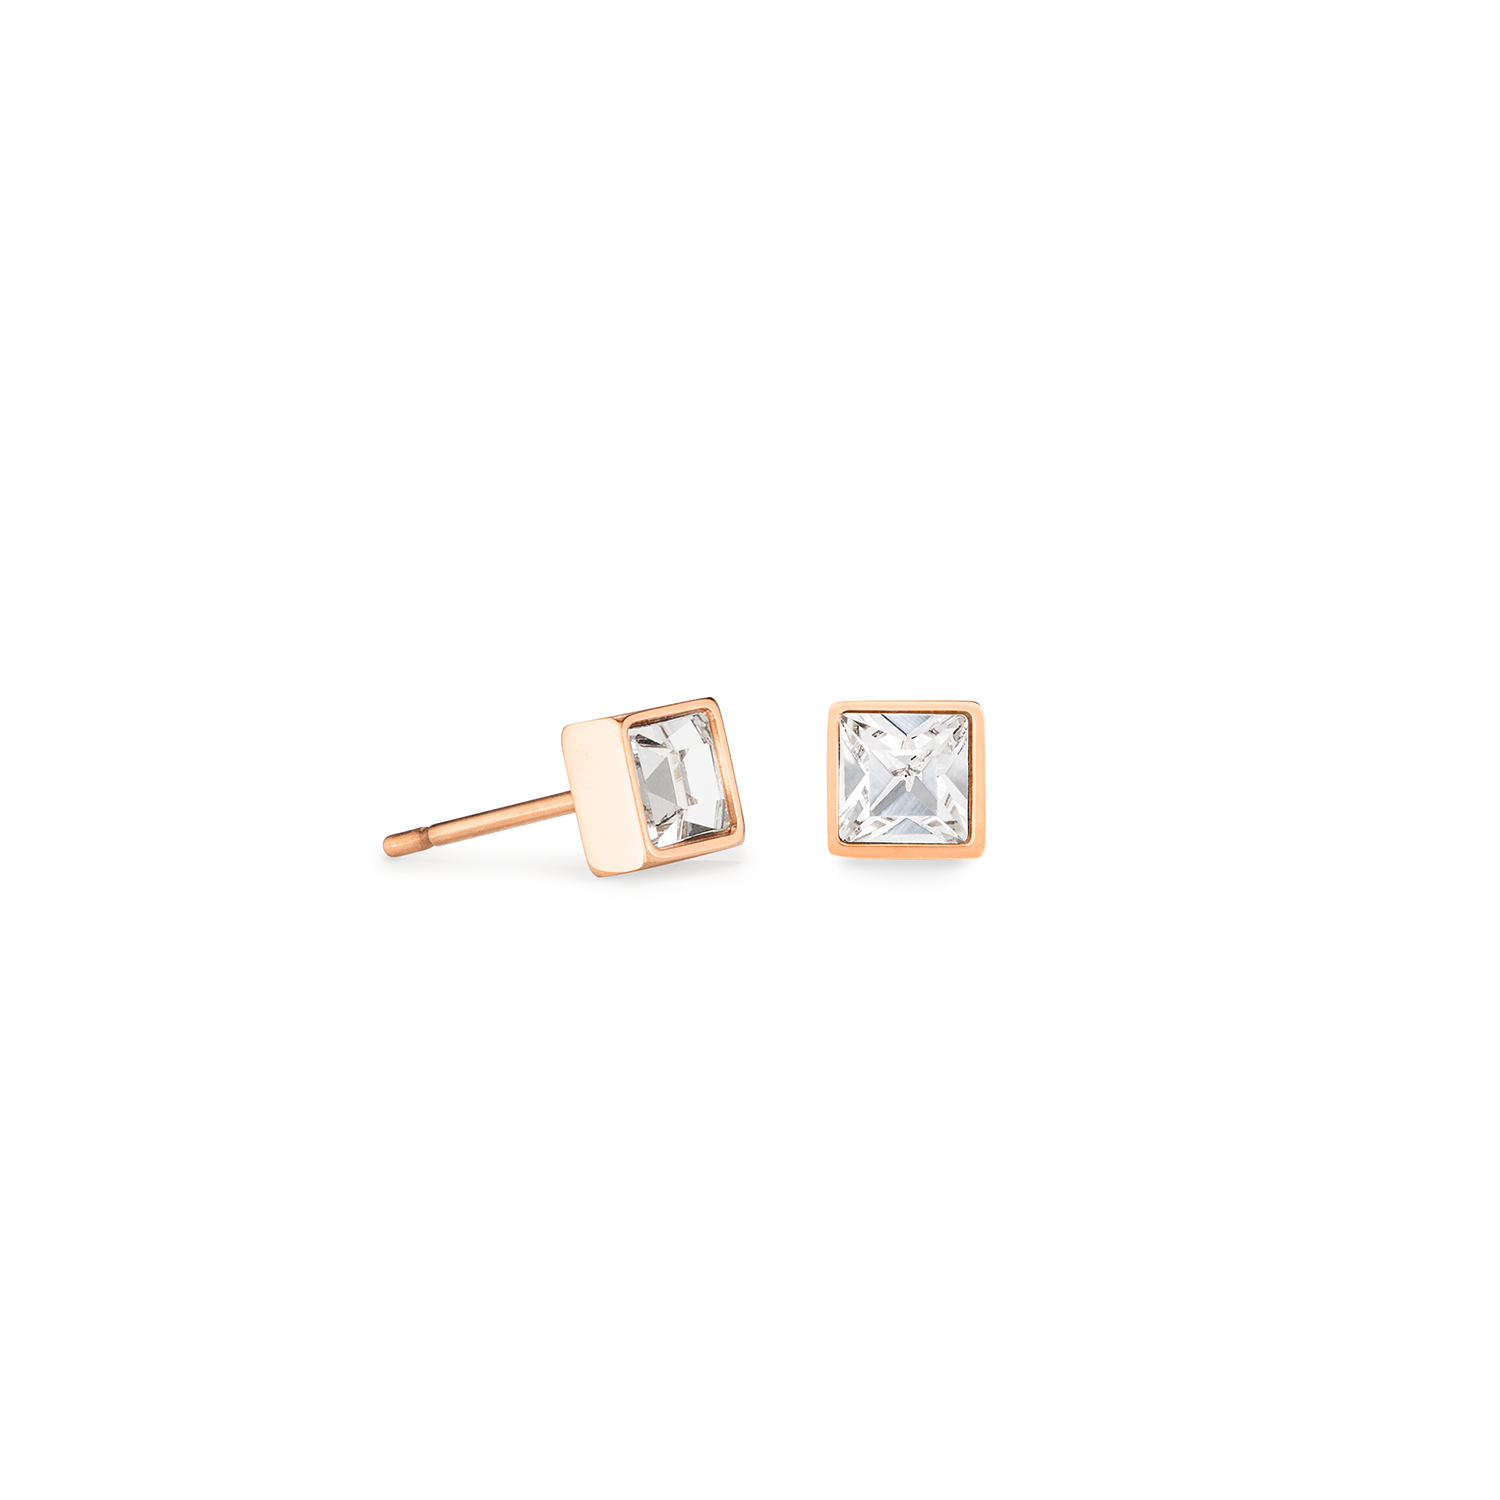 Brilliant Square Small Stud Earrings with Crystals 0501/21_1822 - Crystal Rose Gold